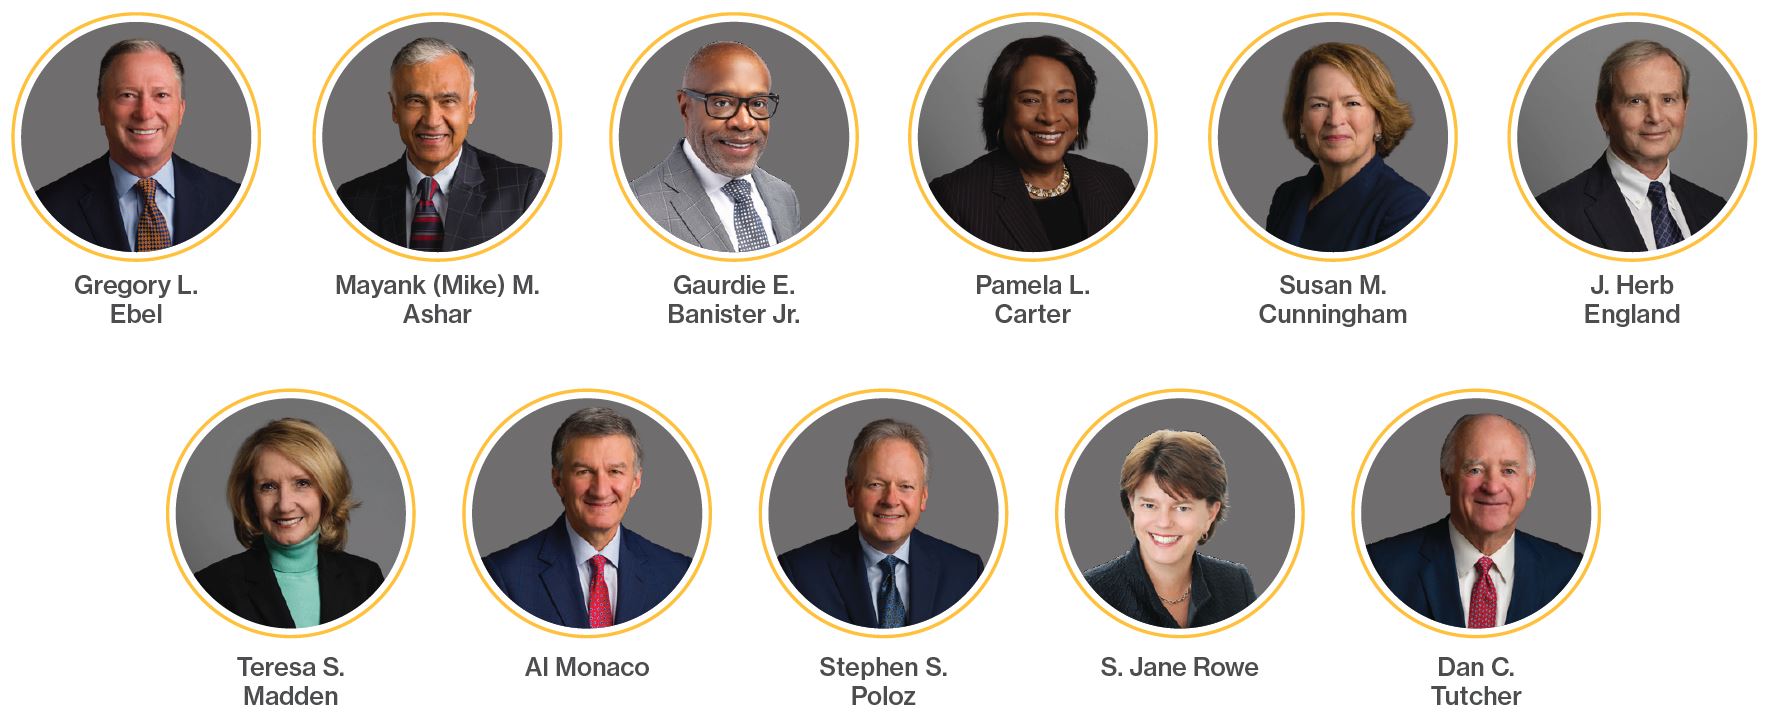 Enbridge's board of directors from our 2021 annual report